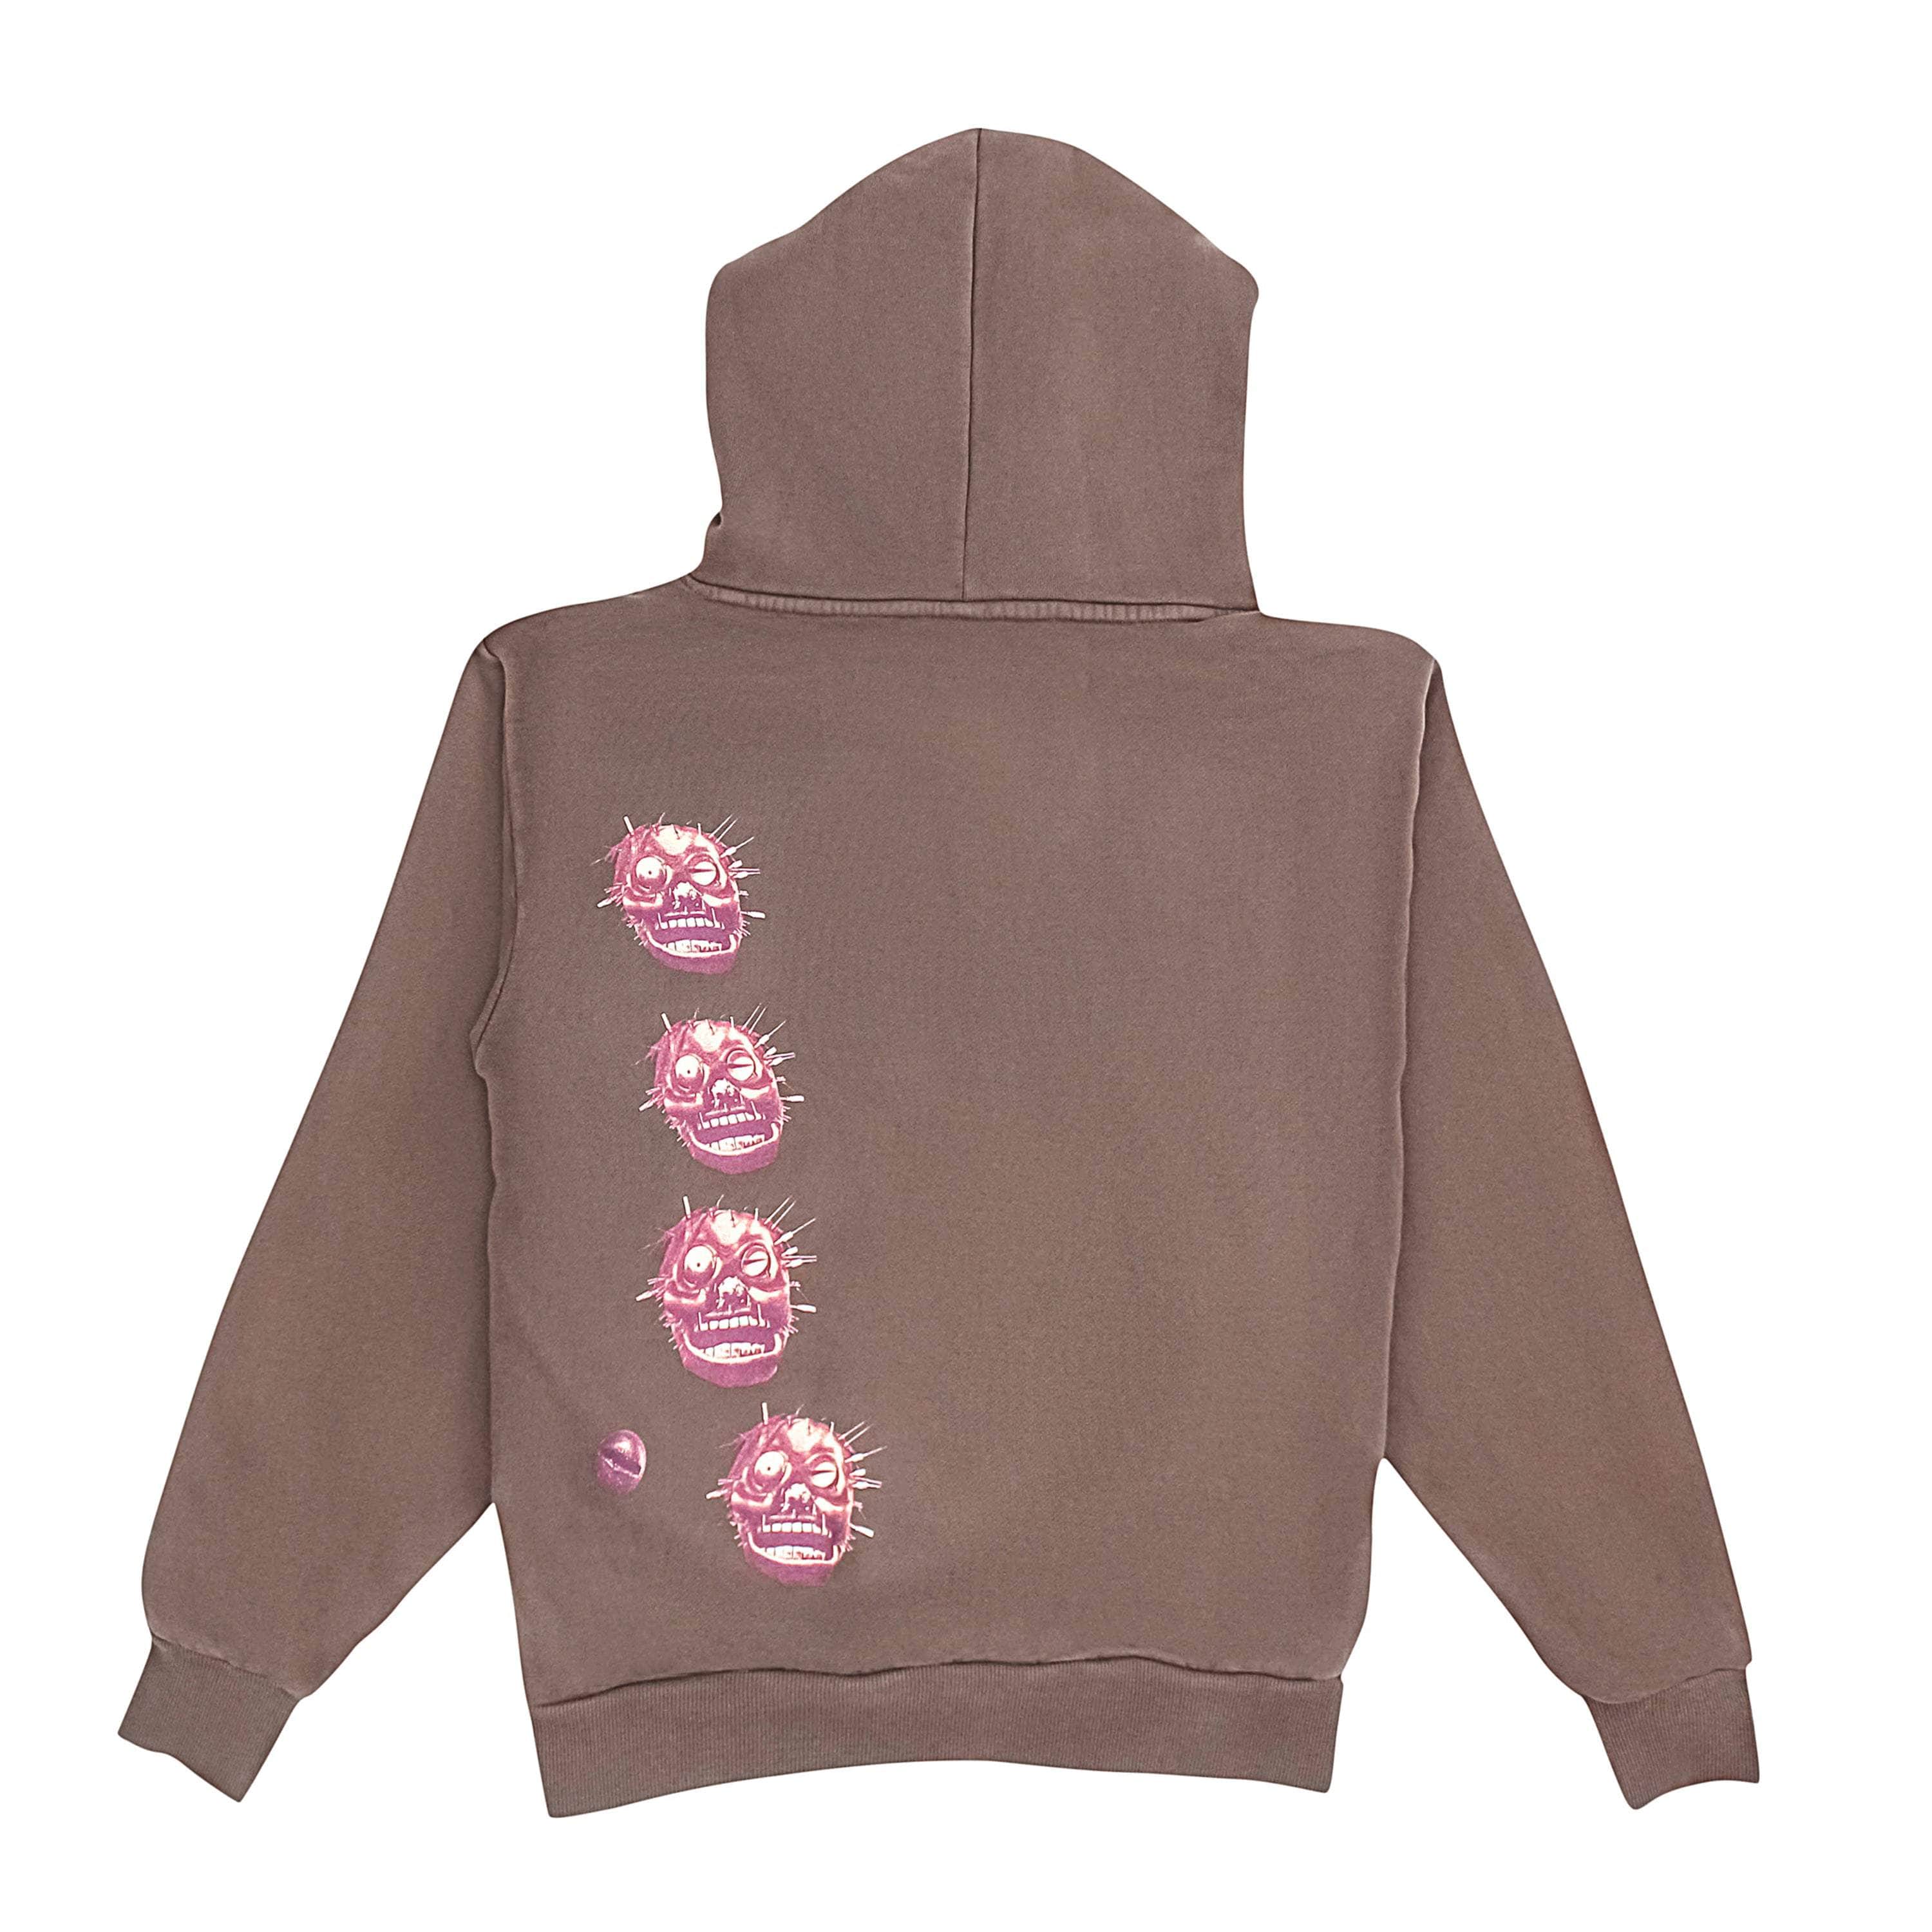 Travis Scott channelenable-all, chicmi, couponcollection, main-clothing, shop375, Stadium Goods, under-250 Brown A2 Hoodie